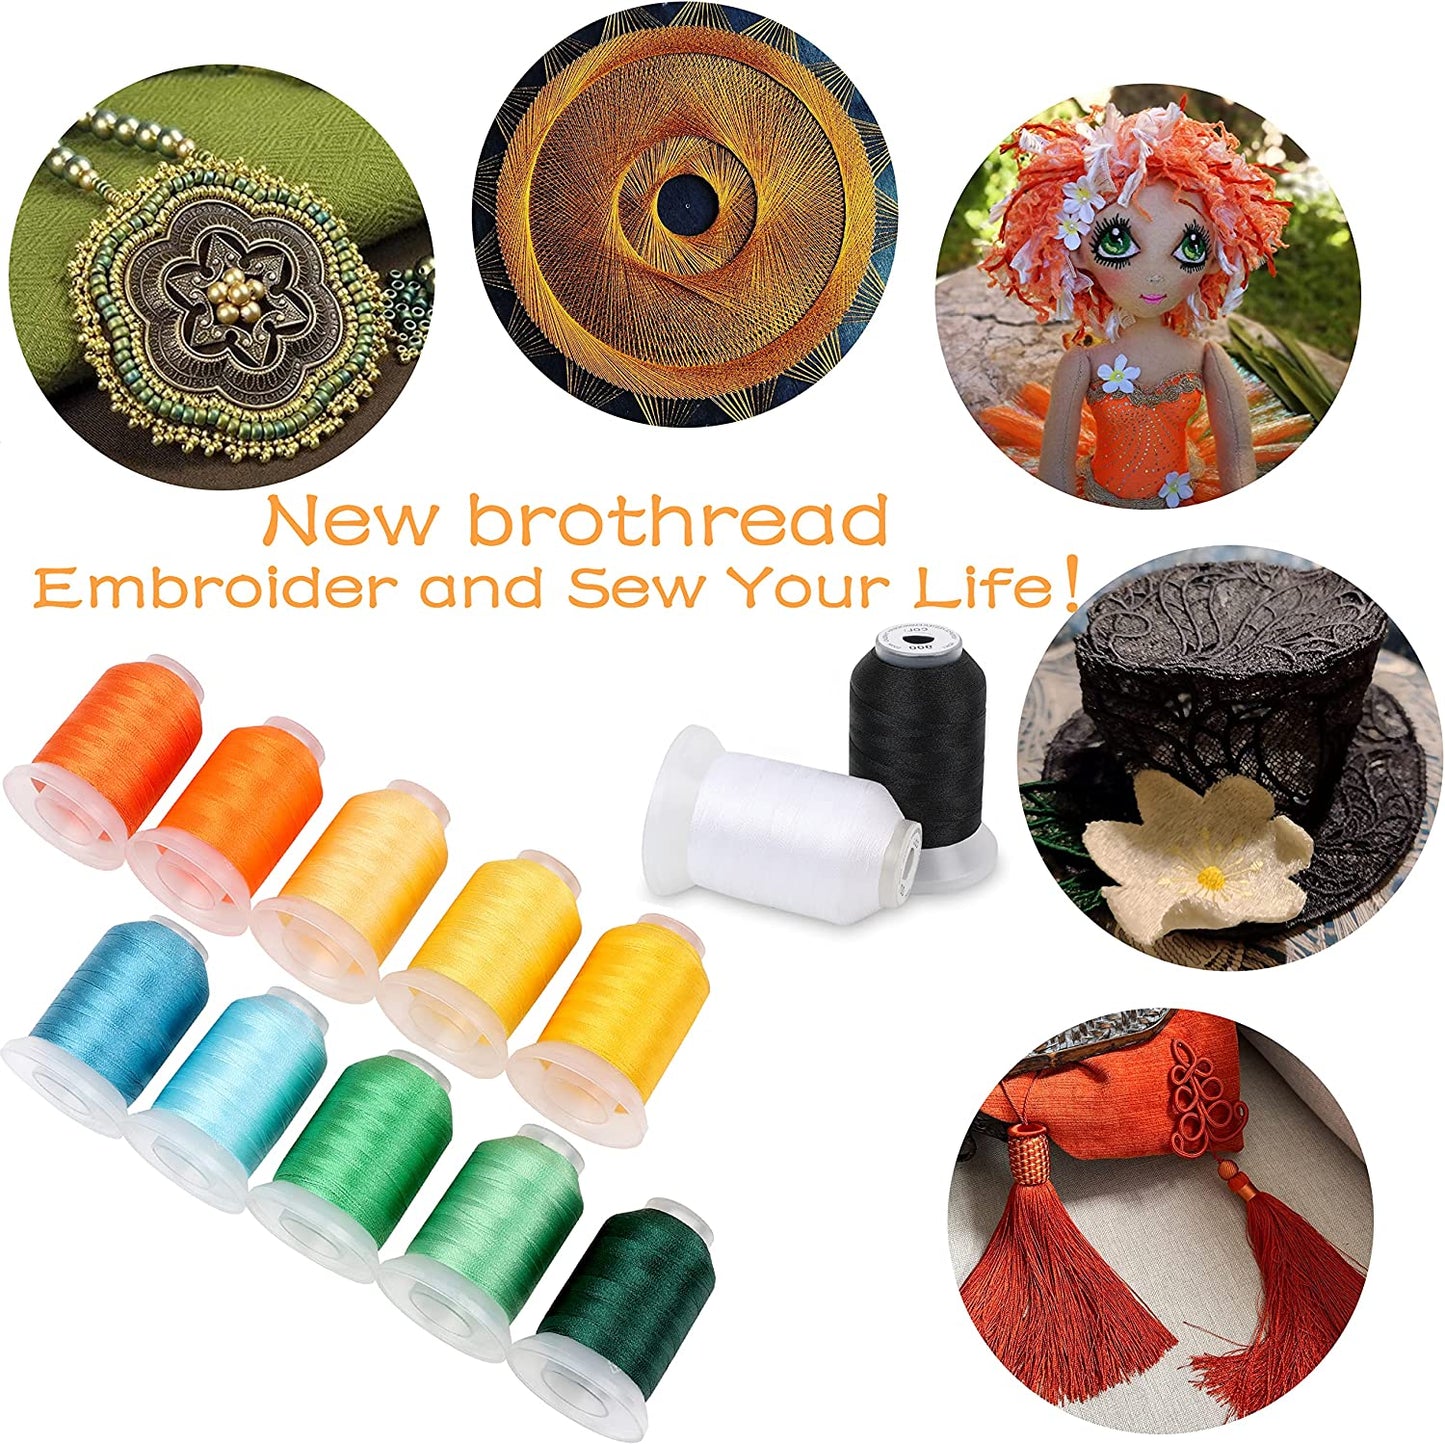 New brothread 40 Brother Colors Polyester Embroidery Machine Thread Kit 500M (550Y) Each Spool